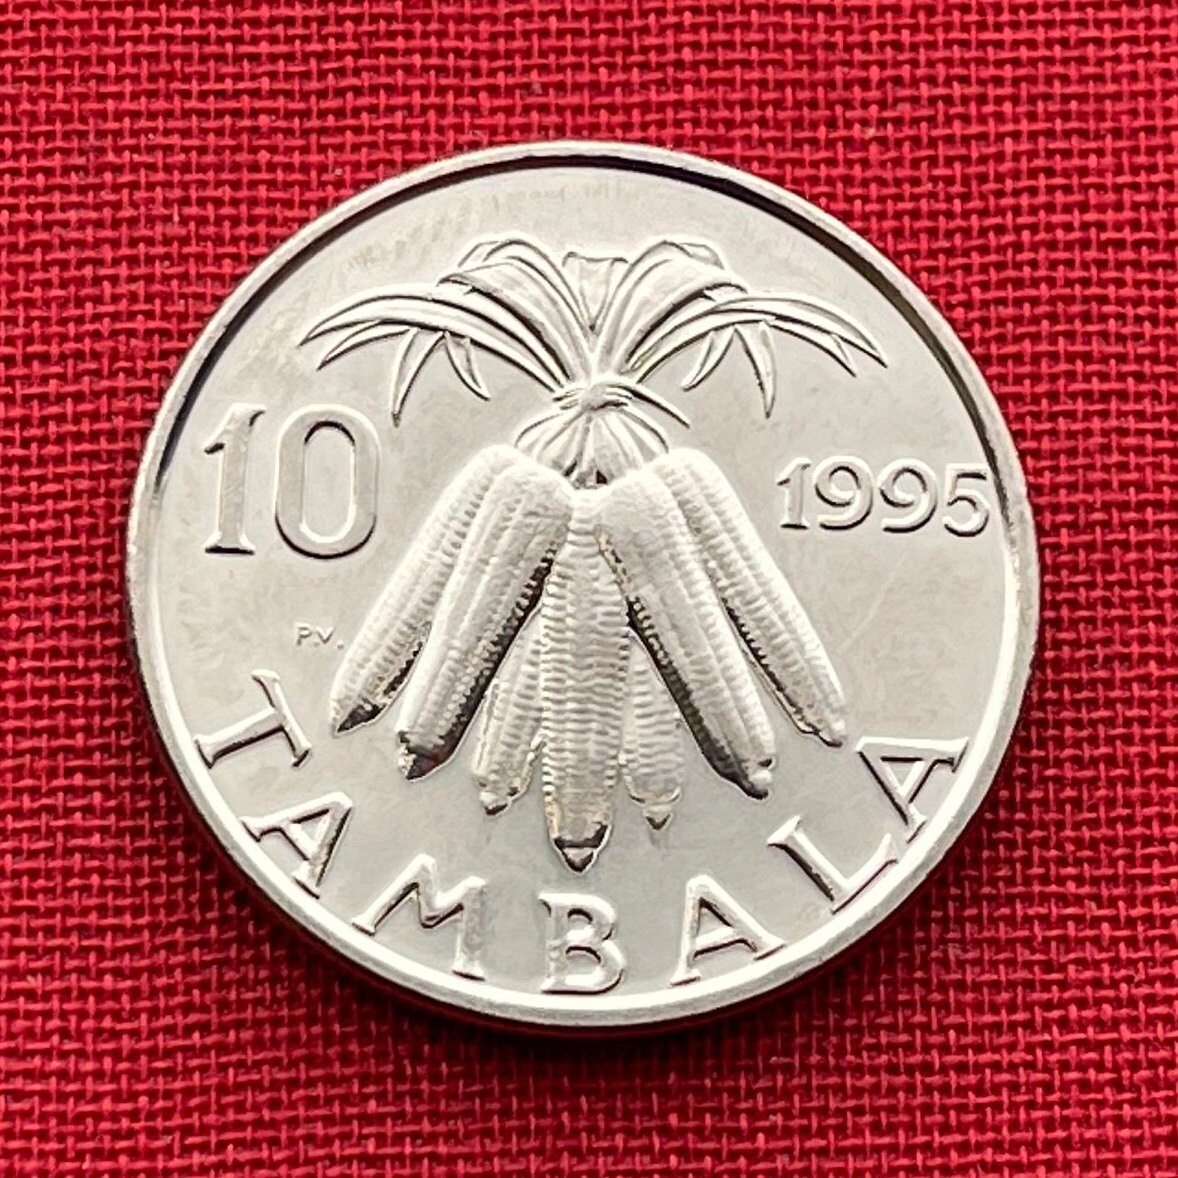 Corn Maize Sheaf 10 Tambala Malawi Authentic Coin Money for Jewelry and Craft Making